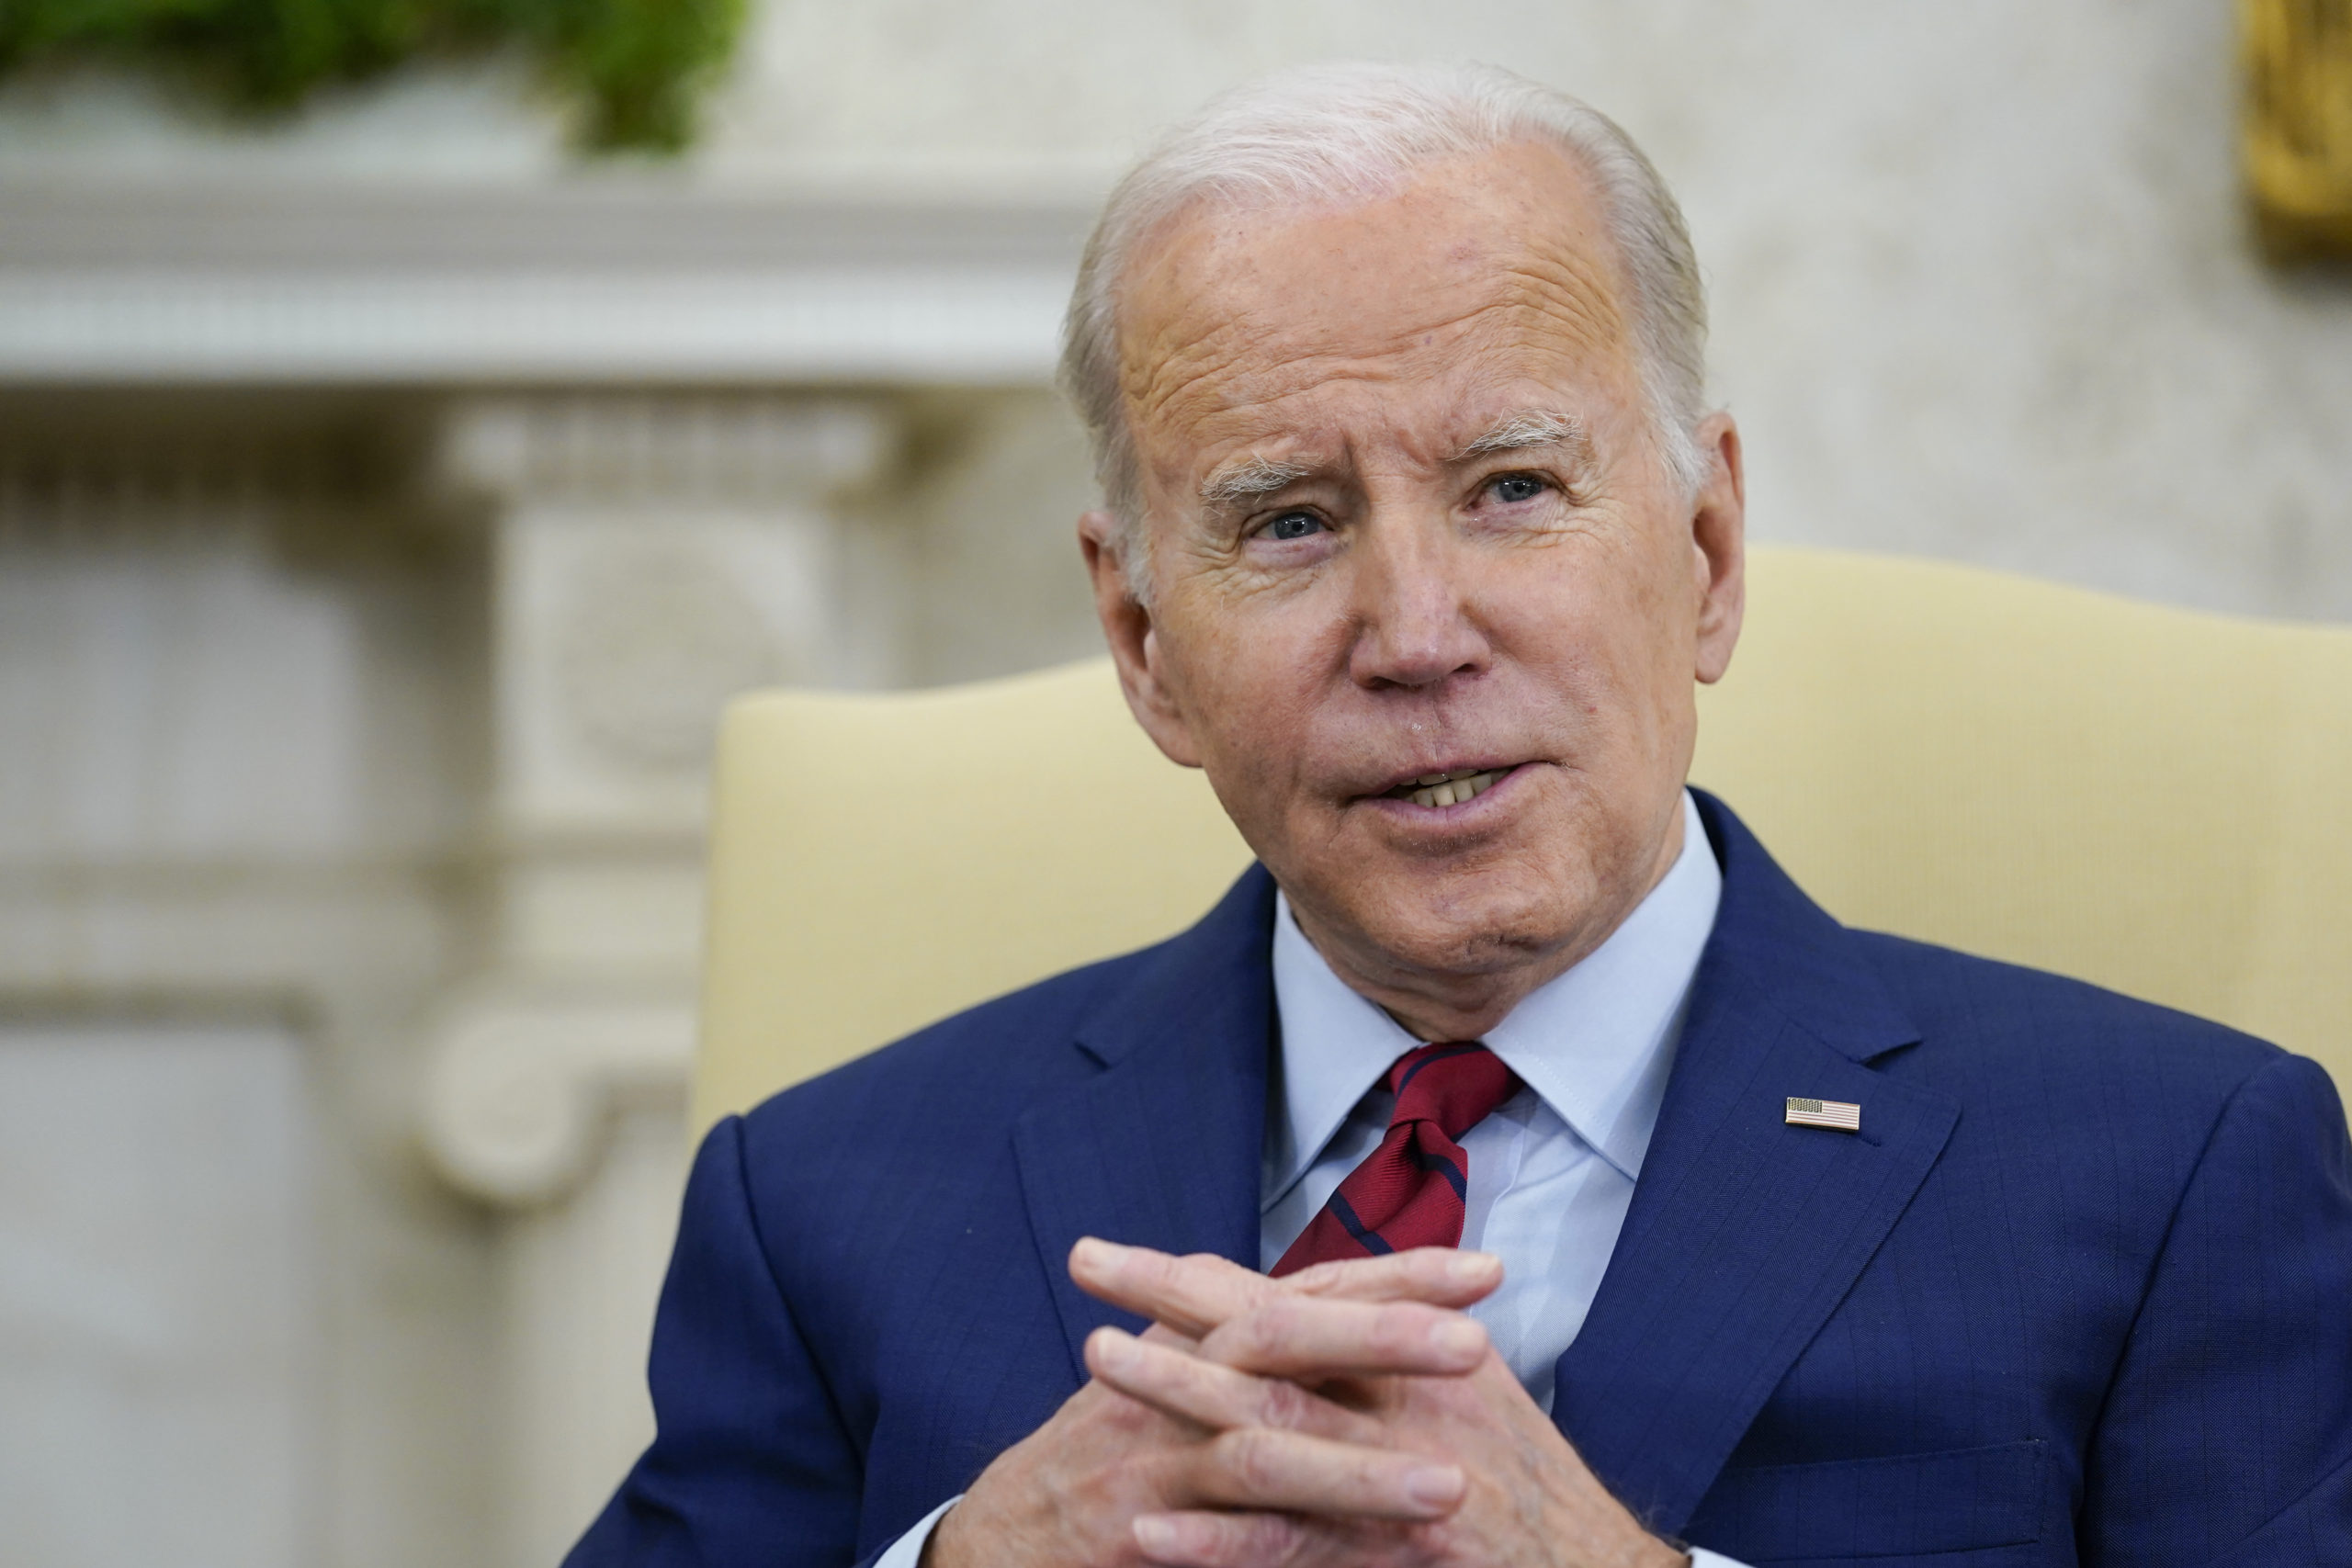 A biopsy confirmed that a skin lesion removed from President Joe Biden's chest was basal cell carcinoma, his doctor reported.